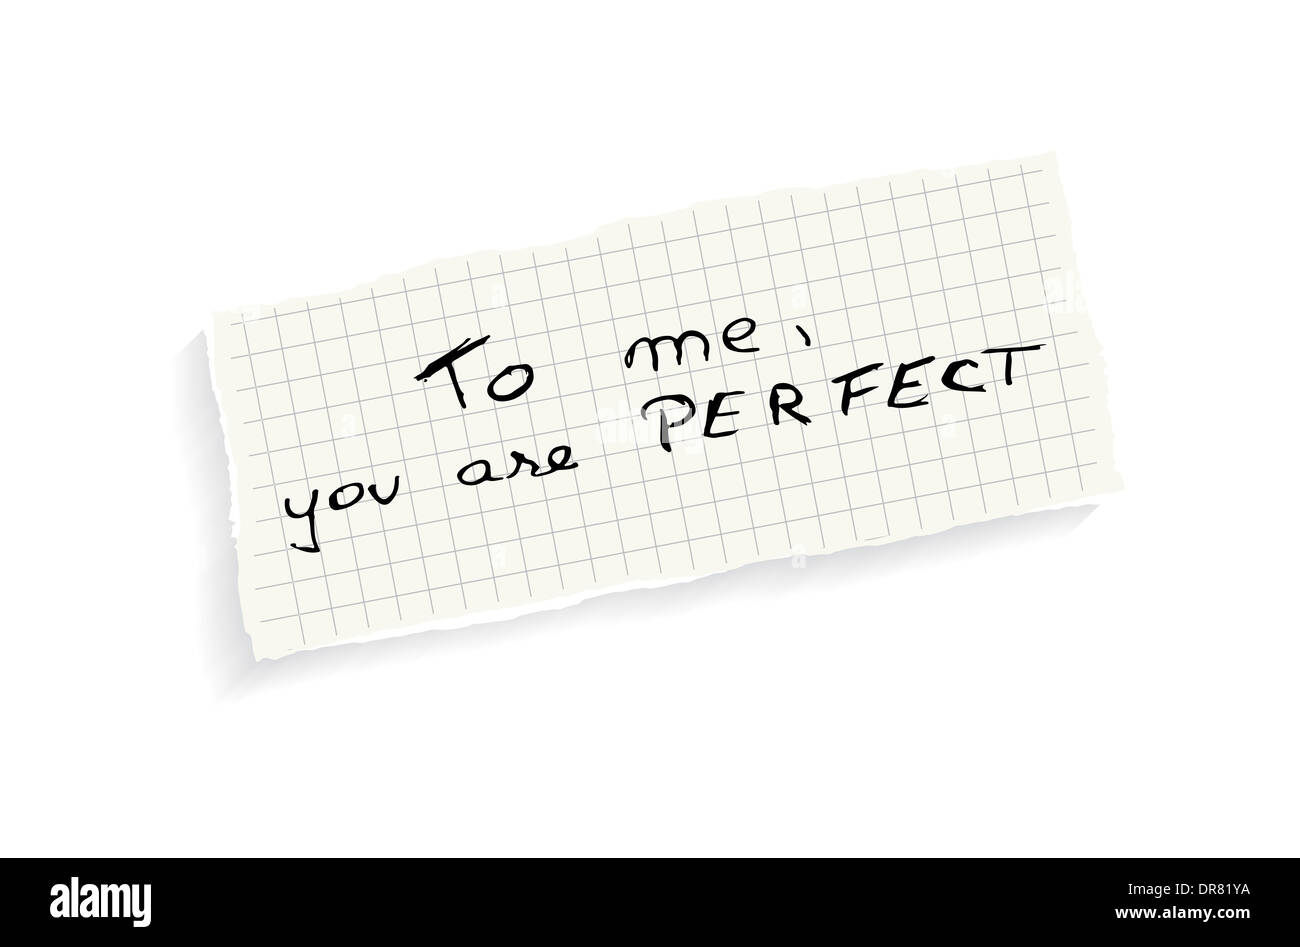 To me, you are perfect!Hand writing text on a piece of math paper isolated on a white background. Stock Photo